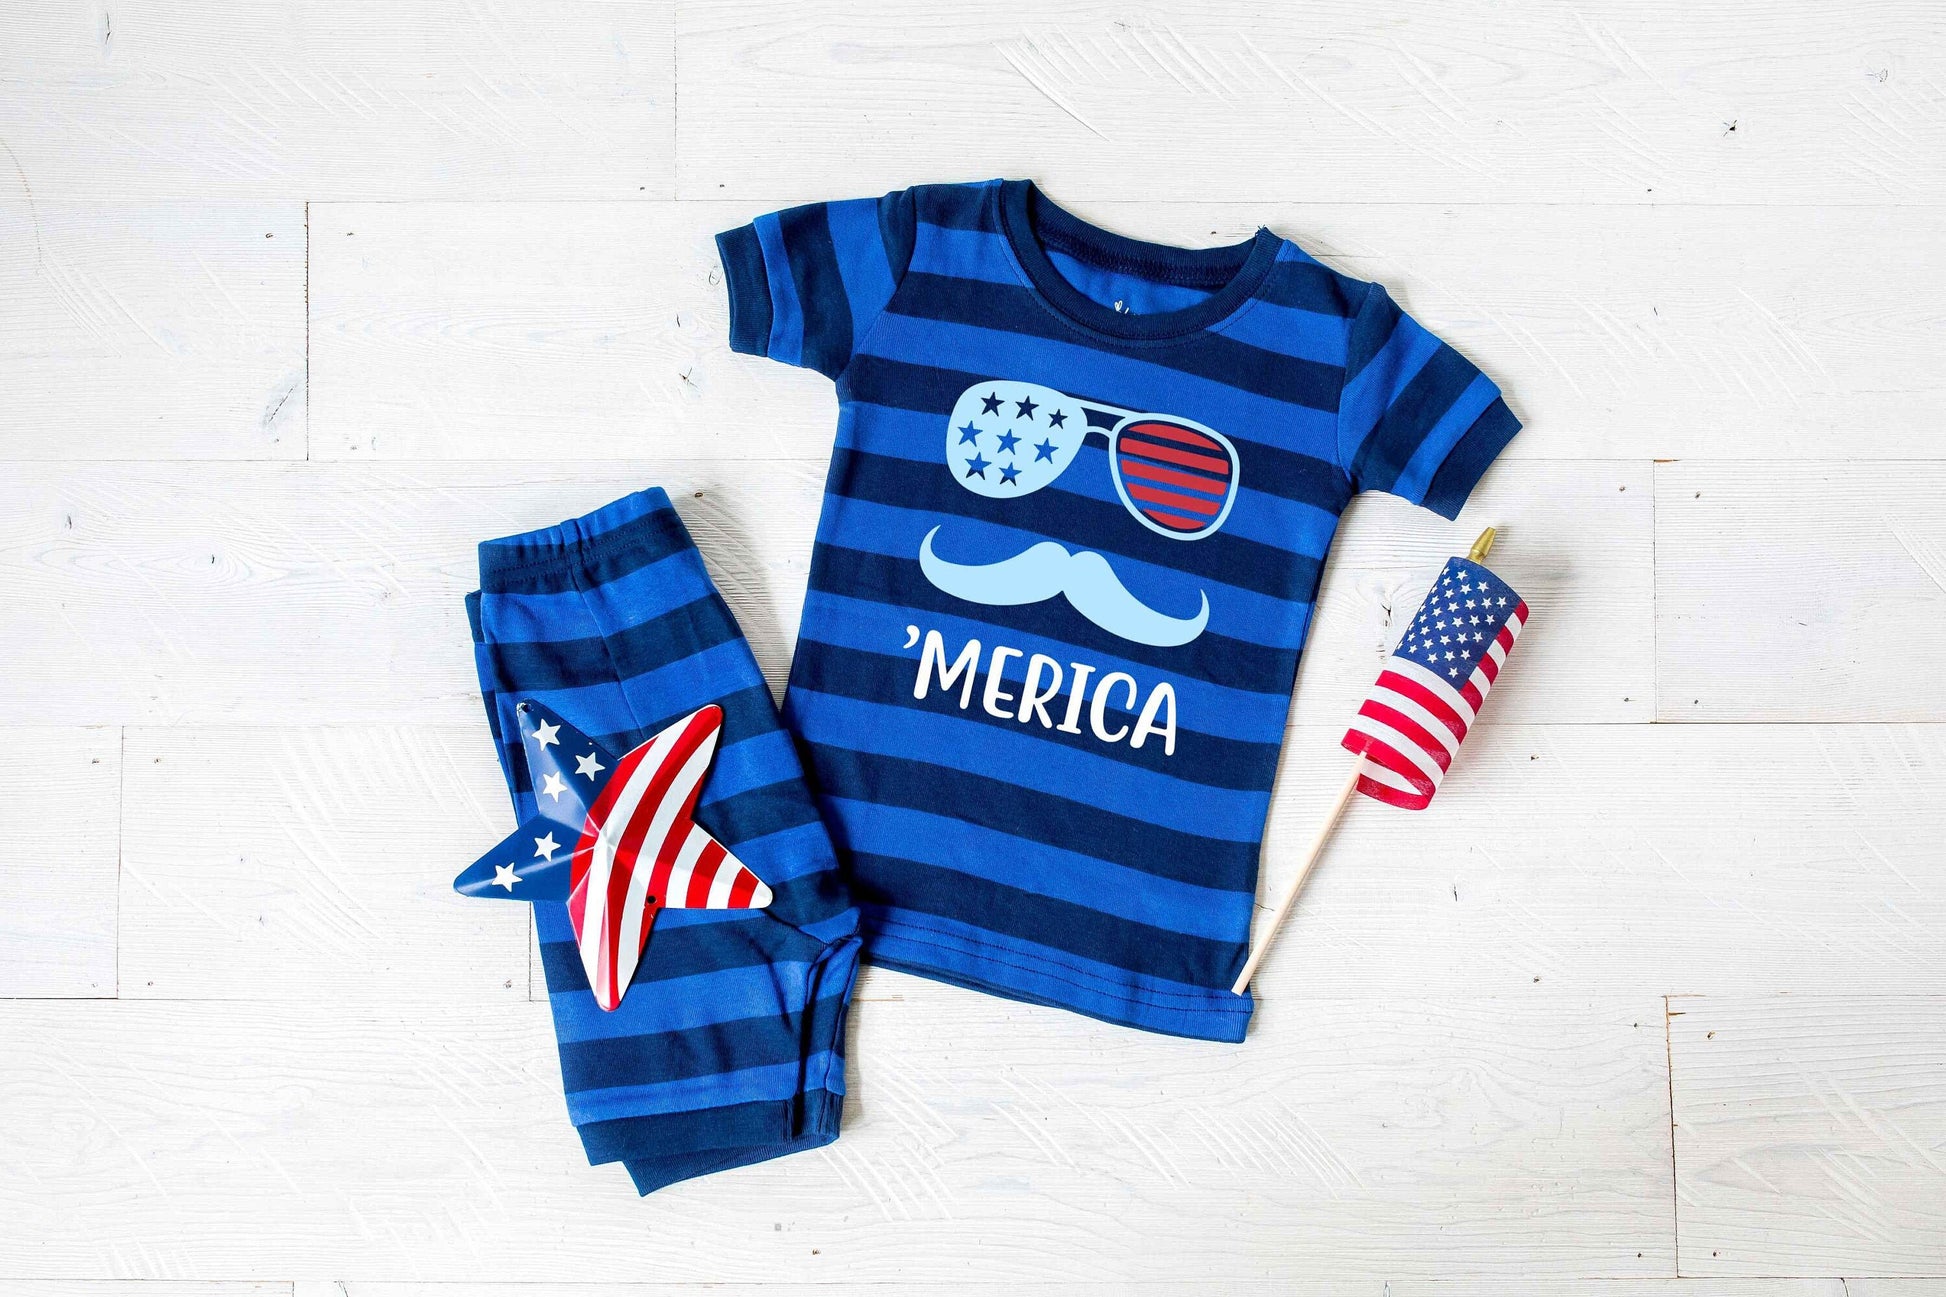 Merica Mustache 4th of July Blue Striped Shorts Toddler and Kids Pajamas - Kids 4th of July Pajamas - 4th of July Toddler Pajamas Set